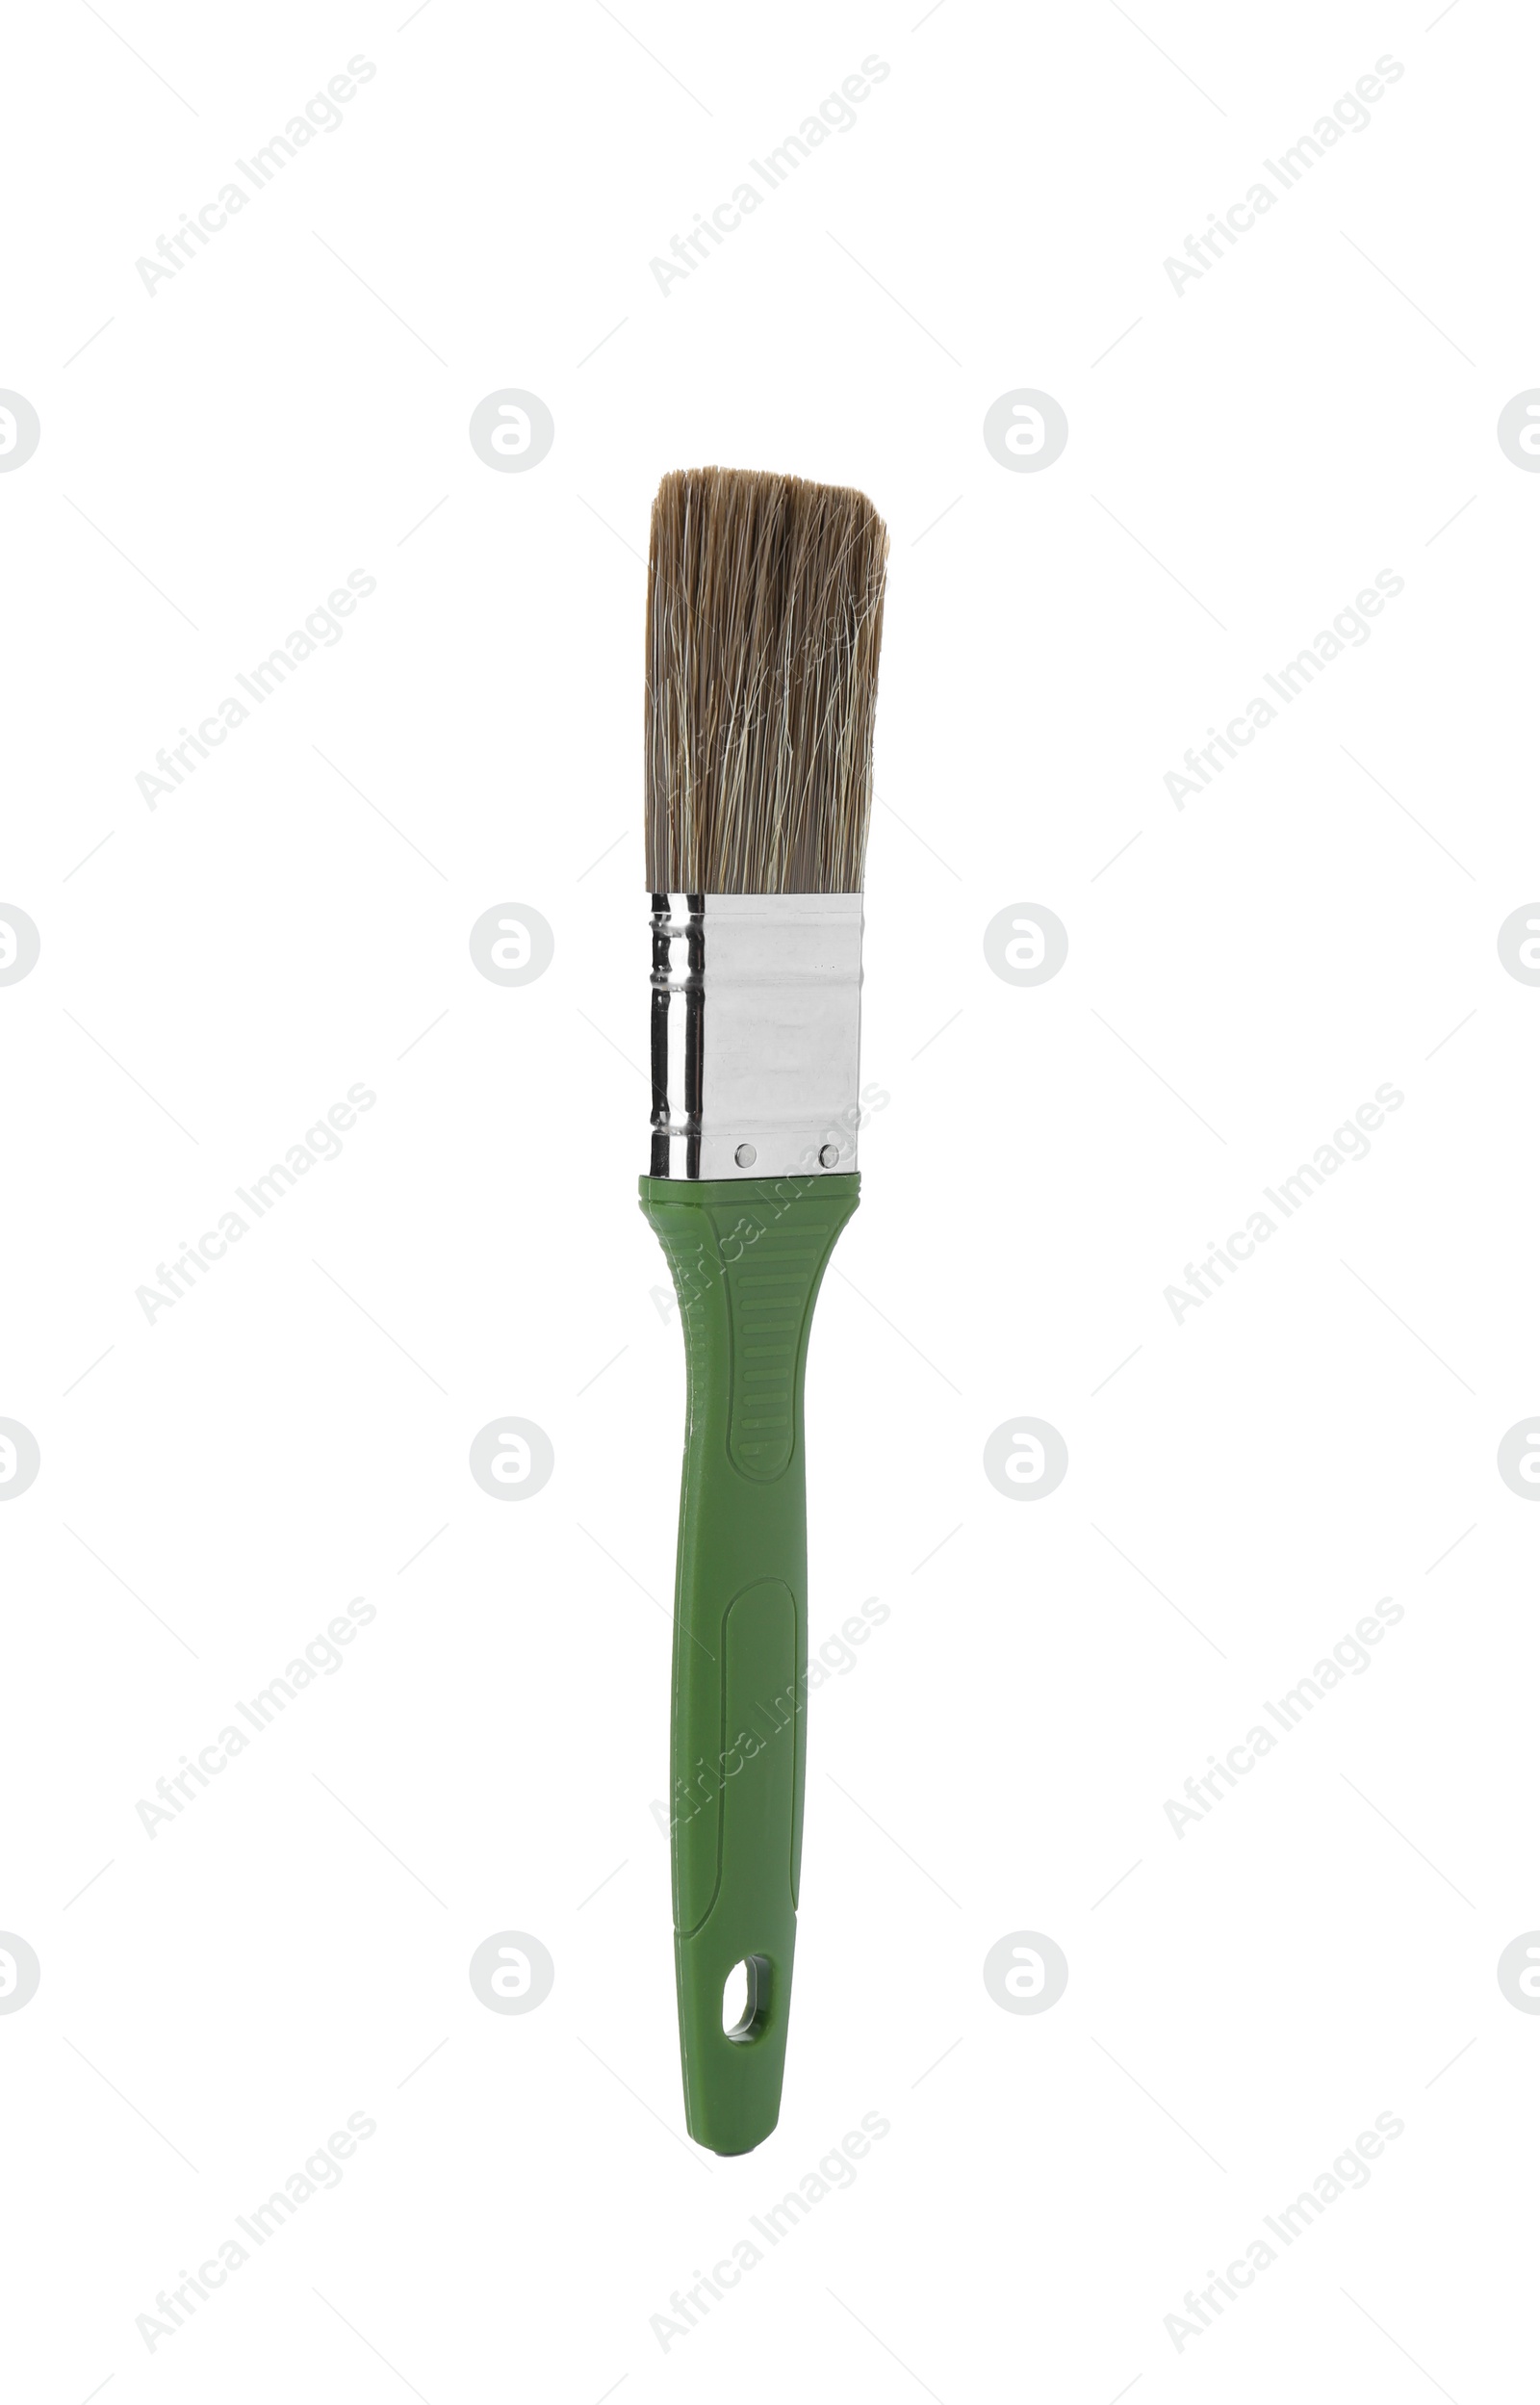 Photo of One paint brush with green handle isolated on white